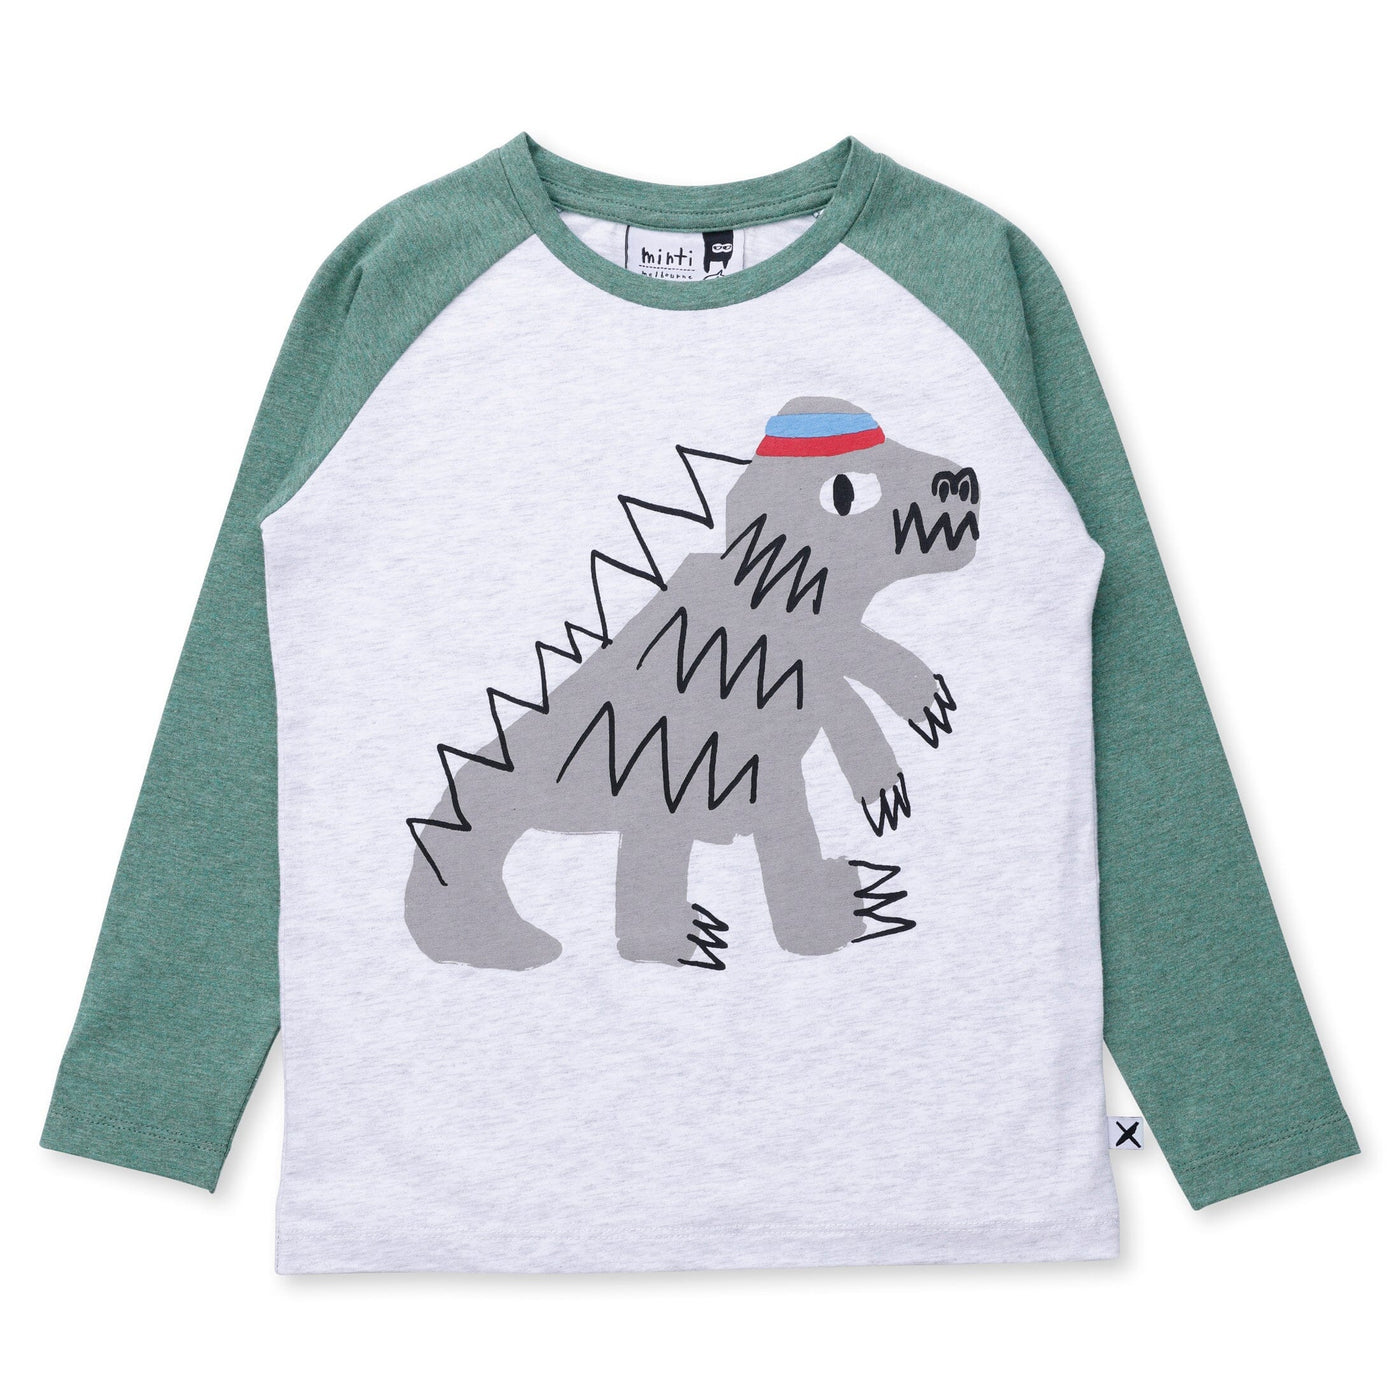 Minti Sporty Dino Tee - White Marle/Forest Marle Long Sleeve T-Shirt Minti 